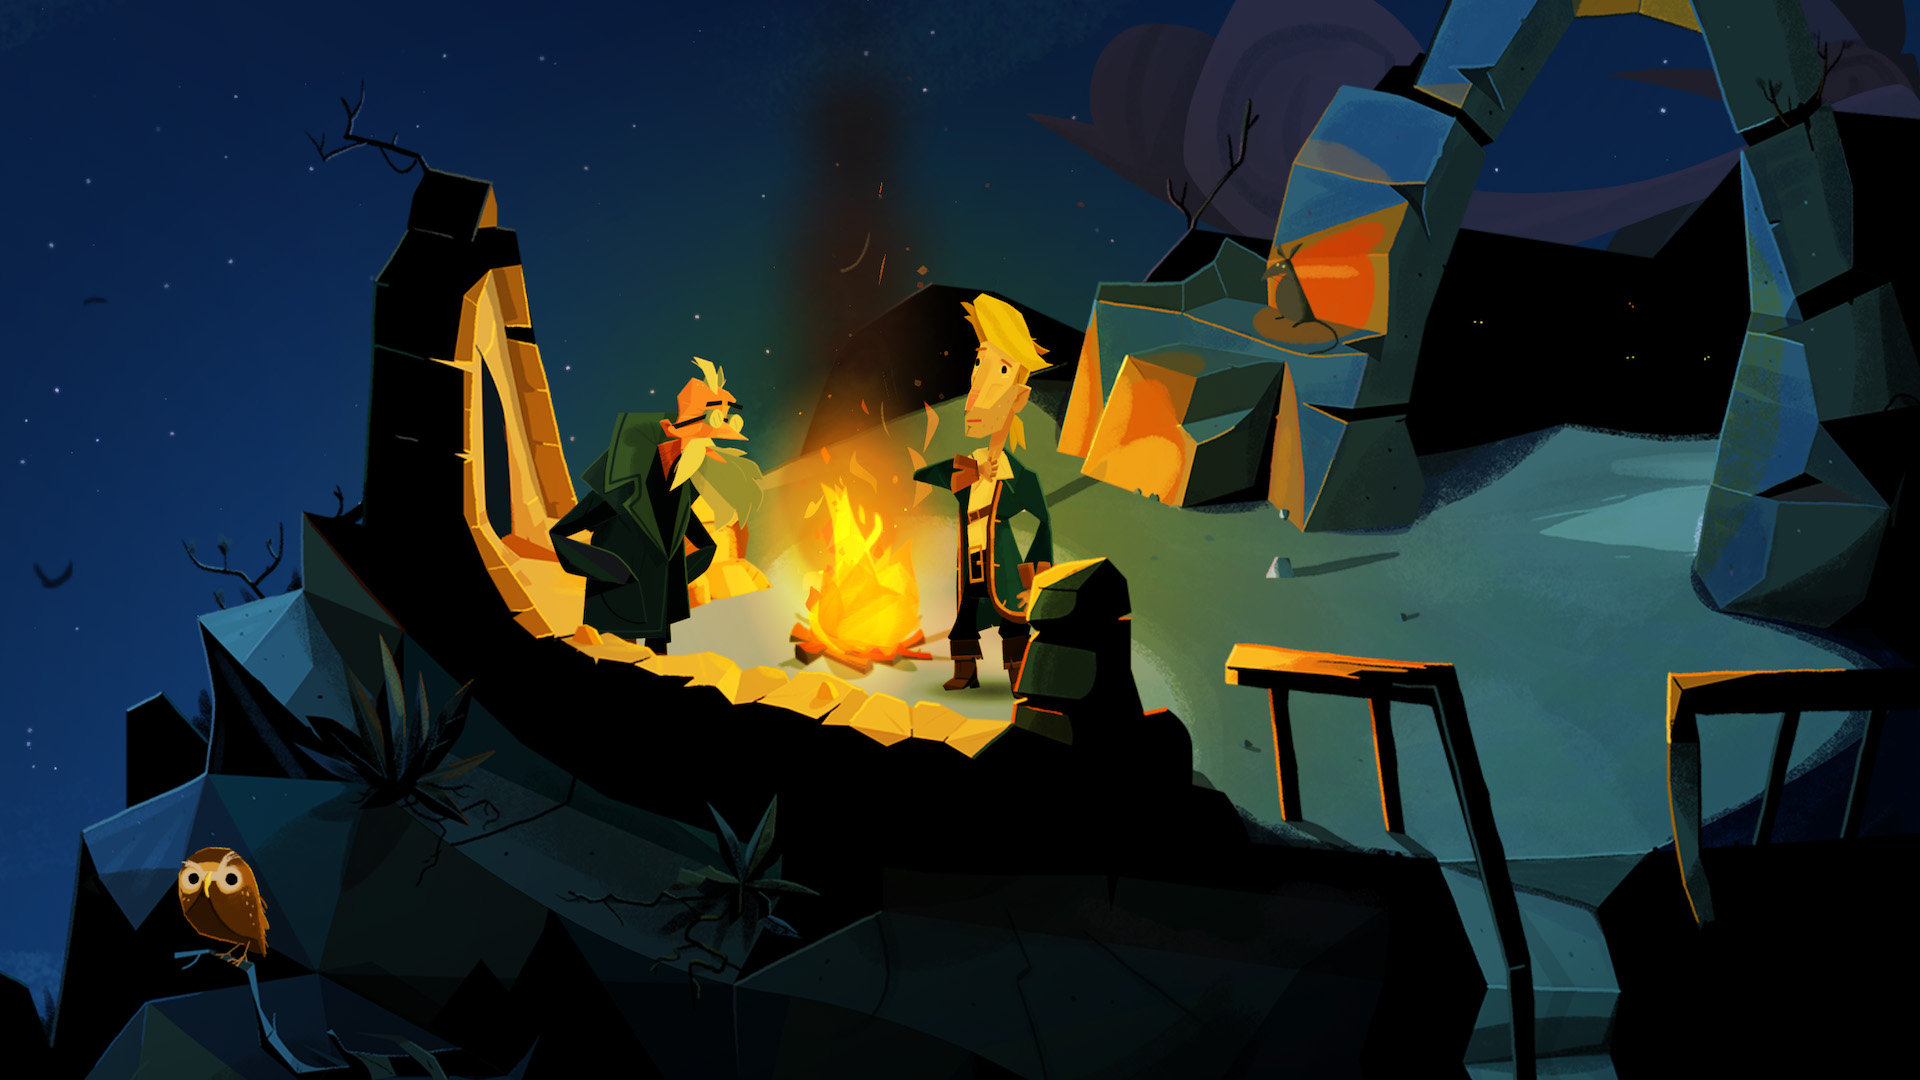 Guybrush Threepwood converses with another pirate over a campfire in Return to Monkey Island